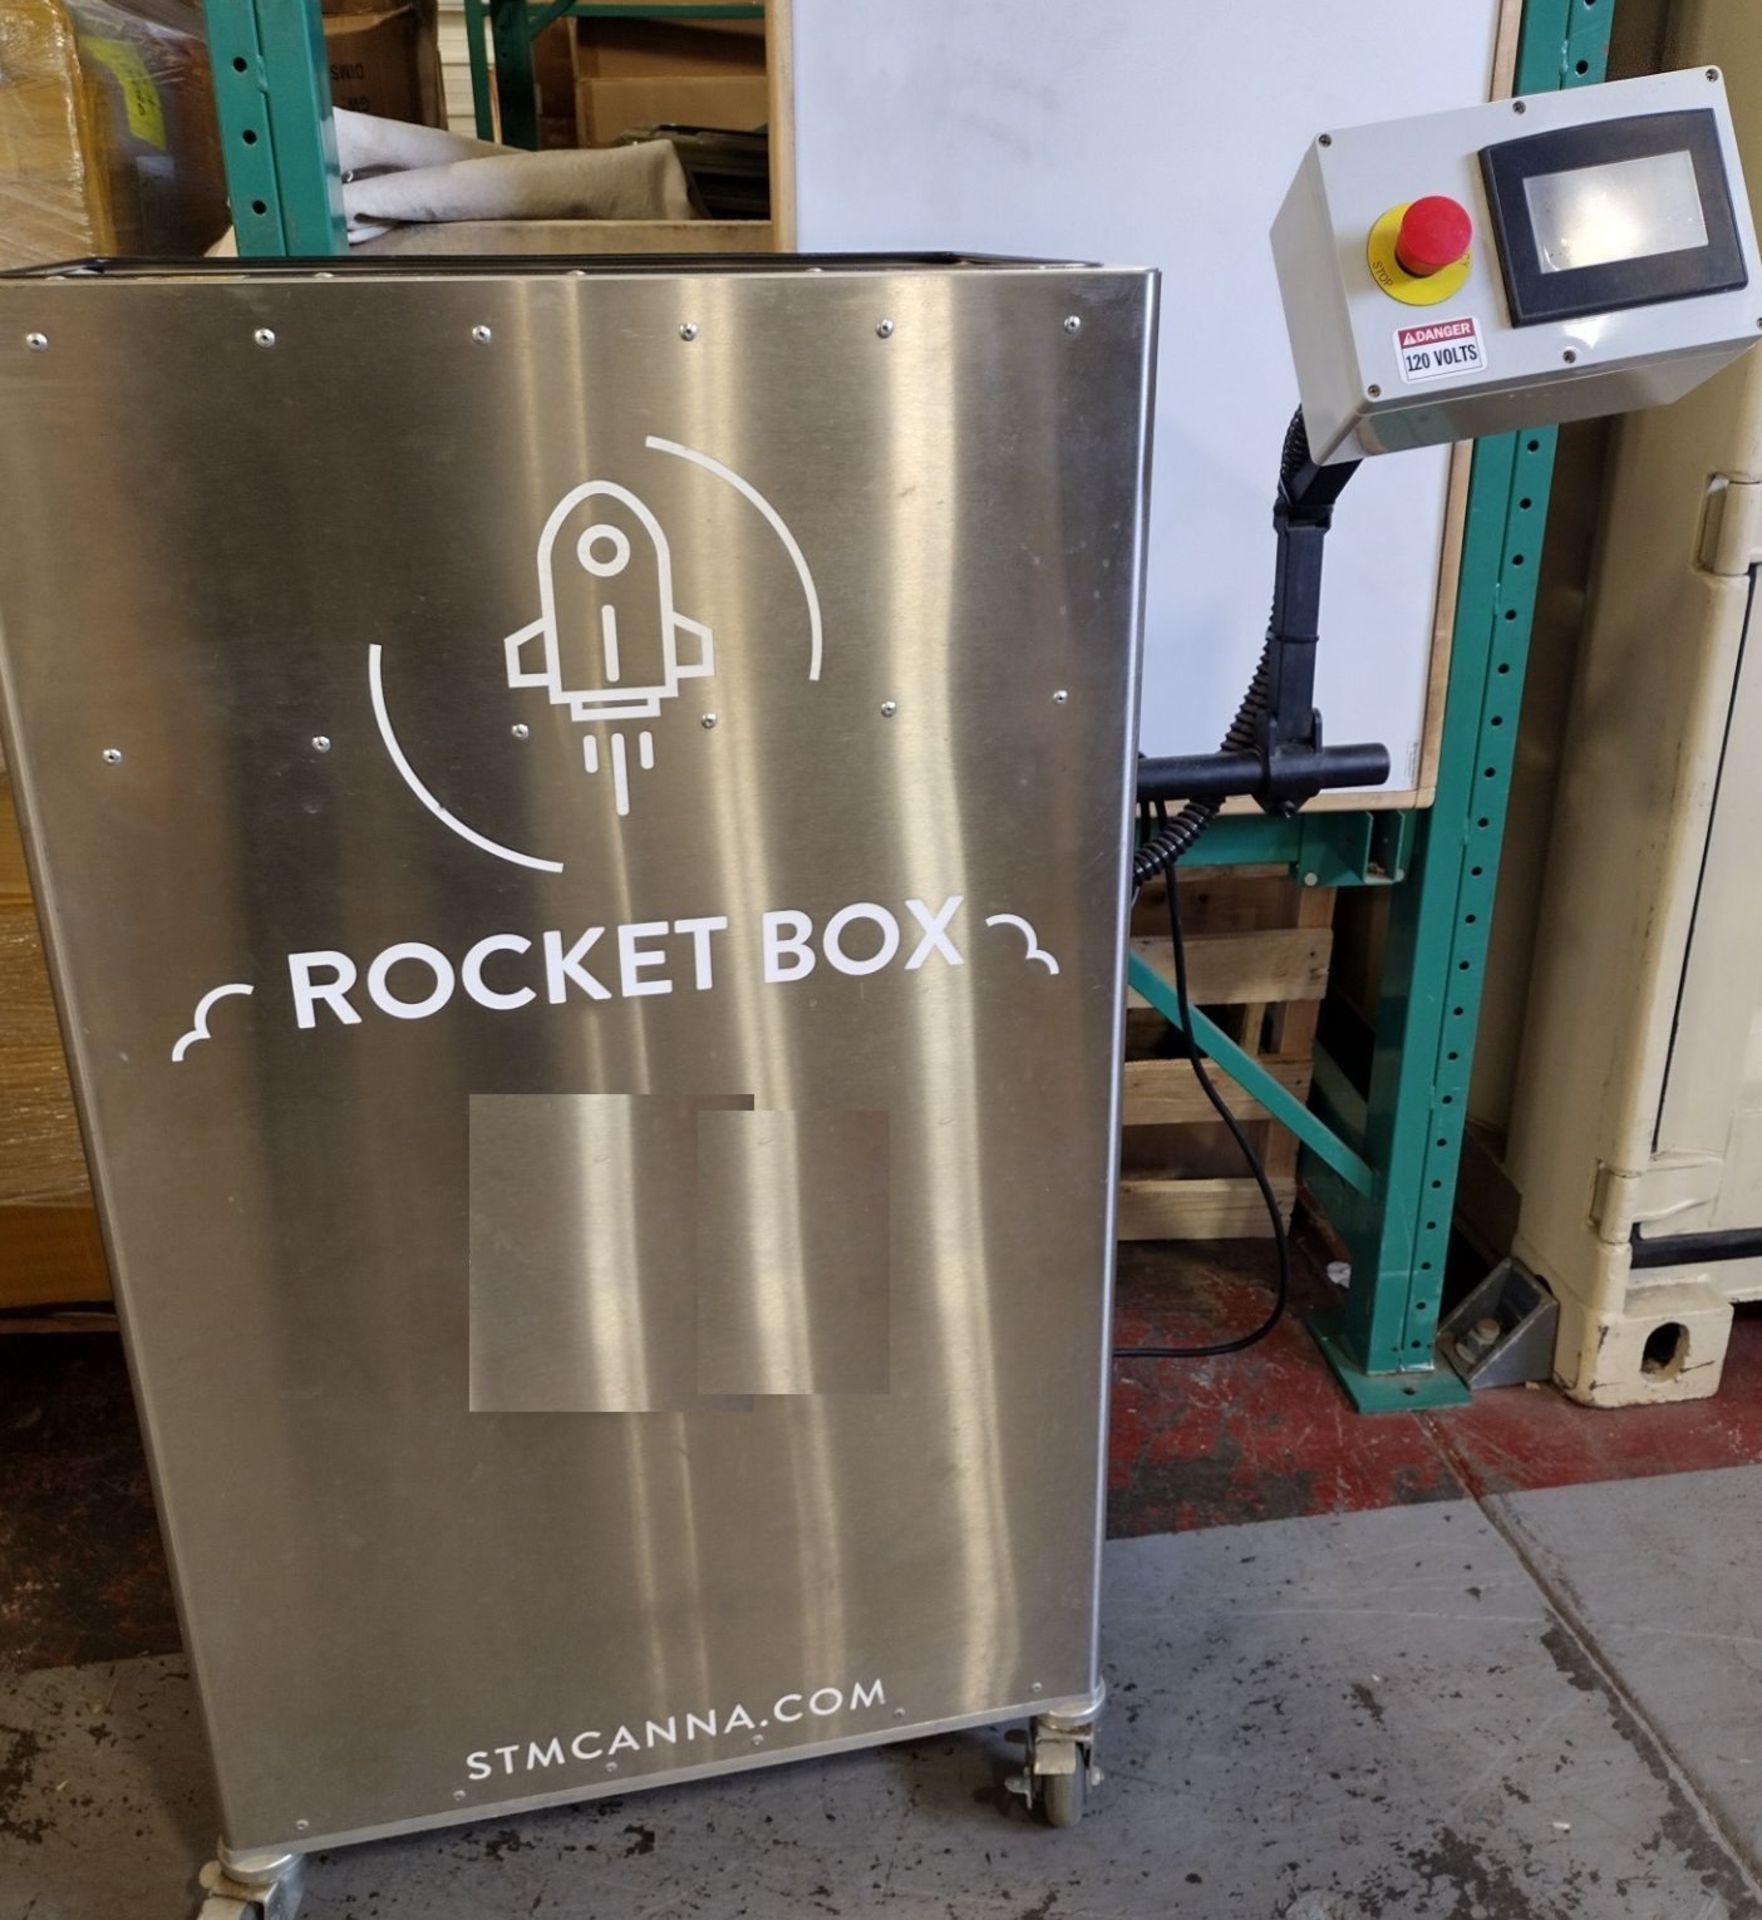 Used- STM Rocketbox 2.0 for Automated Crafting of Pre-Rolls, Model RB453.